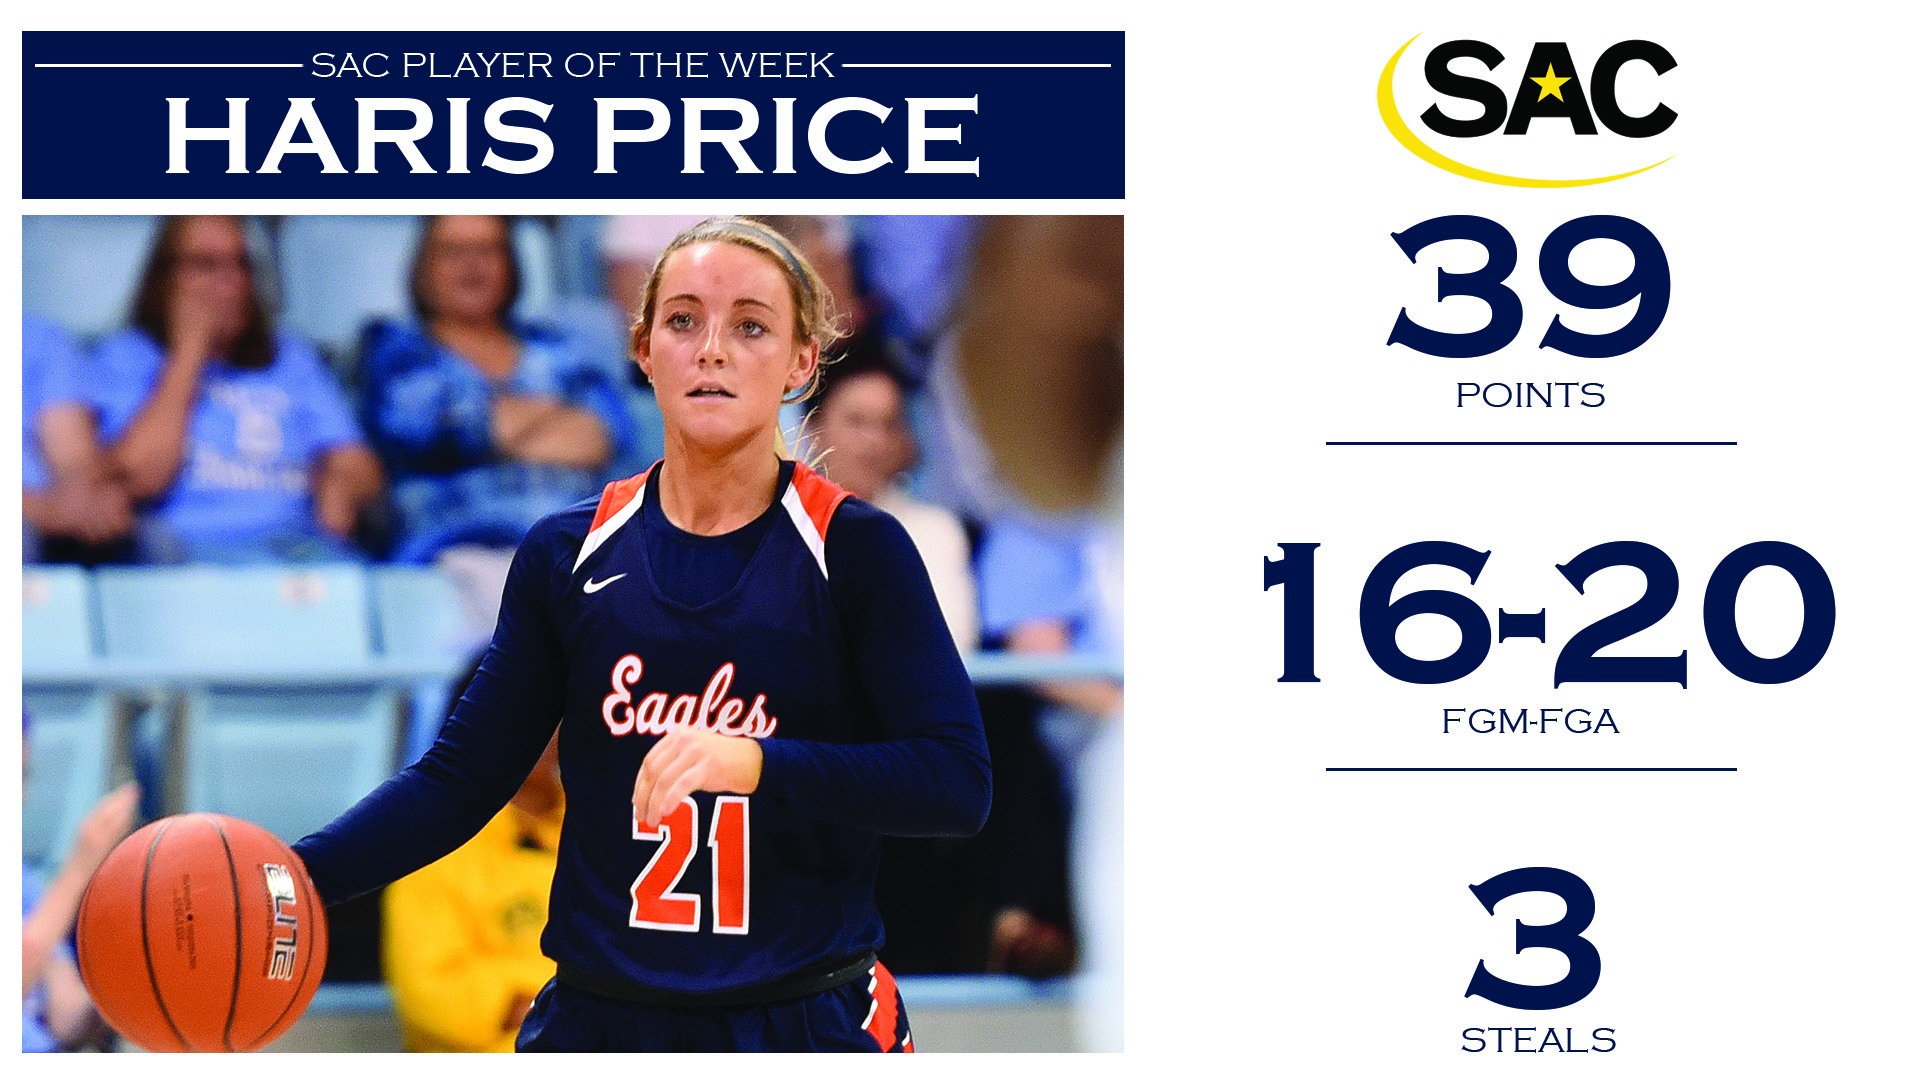 Price secures fourth-career SAC Player of the Week